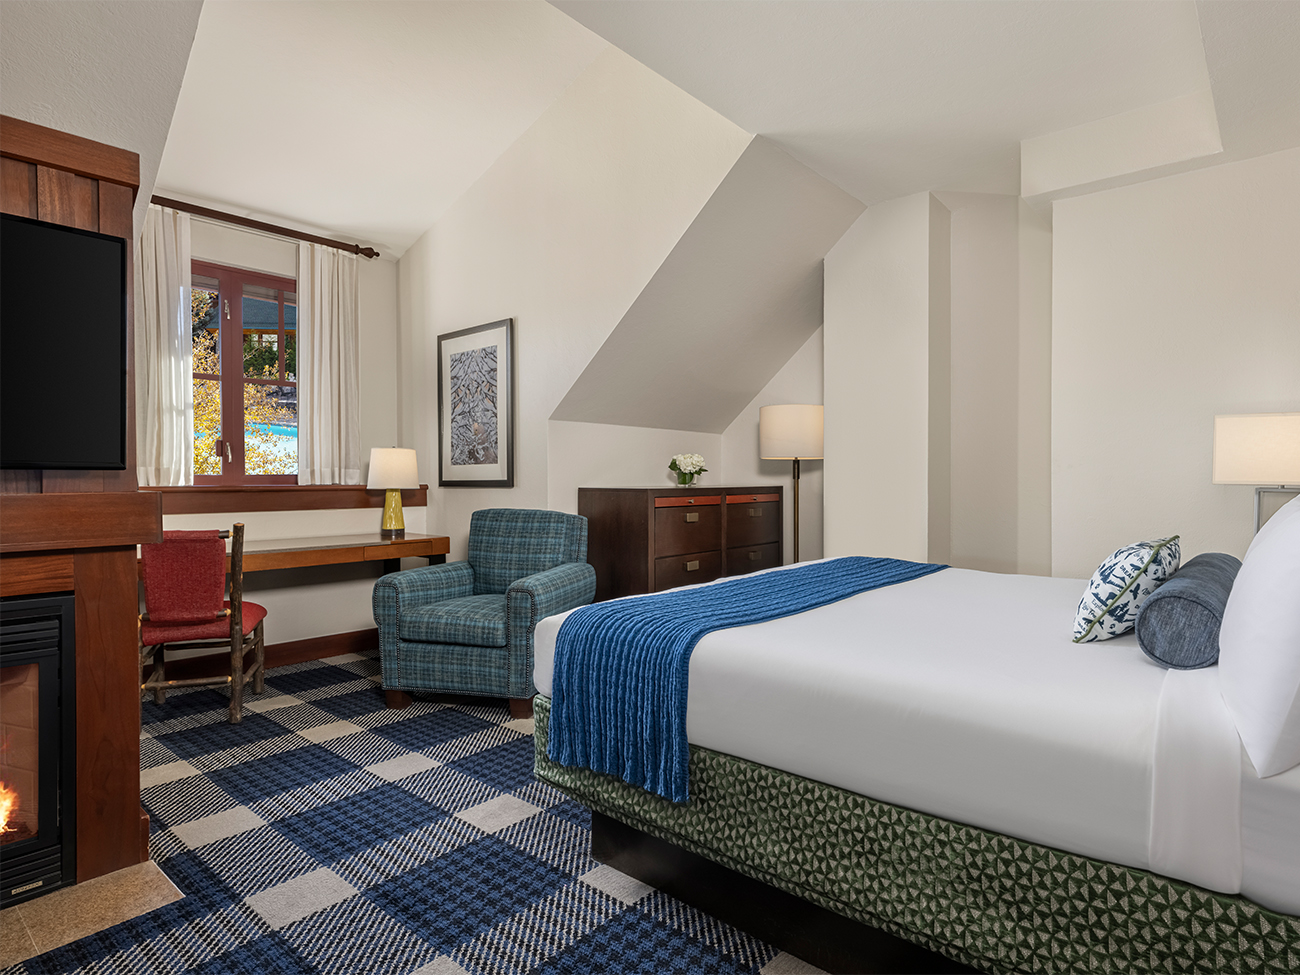 Marriott's Grand Residence Club<span class='trademark'>®</span> 1, Lake Tahoe Penthouse Master Bedroom. Marriott's Grand Residence Club<span class='trademark'>®</span> 1, Lake Tahoe is located in South Lake Tahoe, California United States.